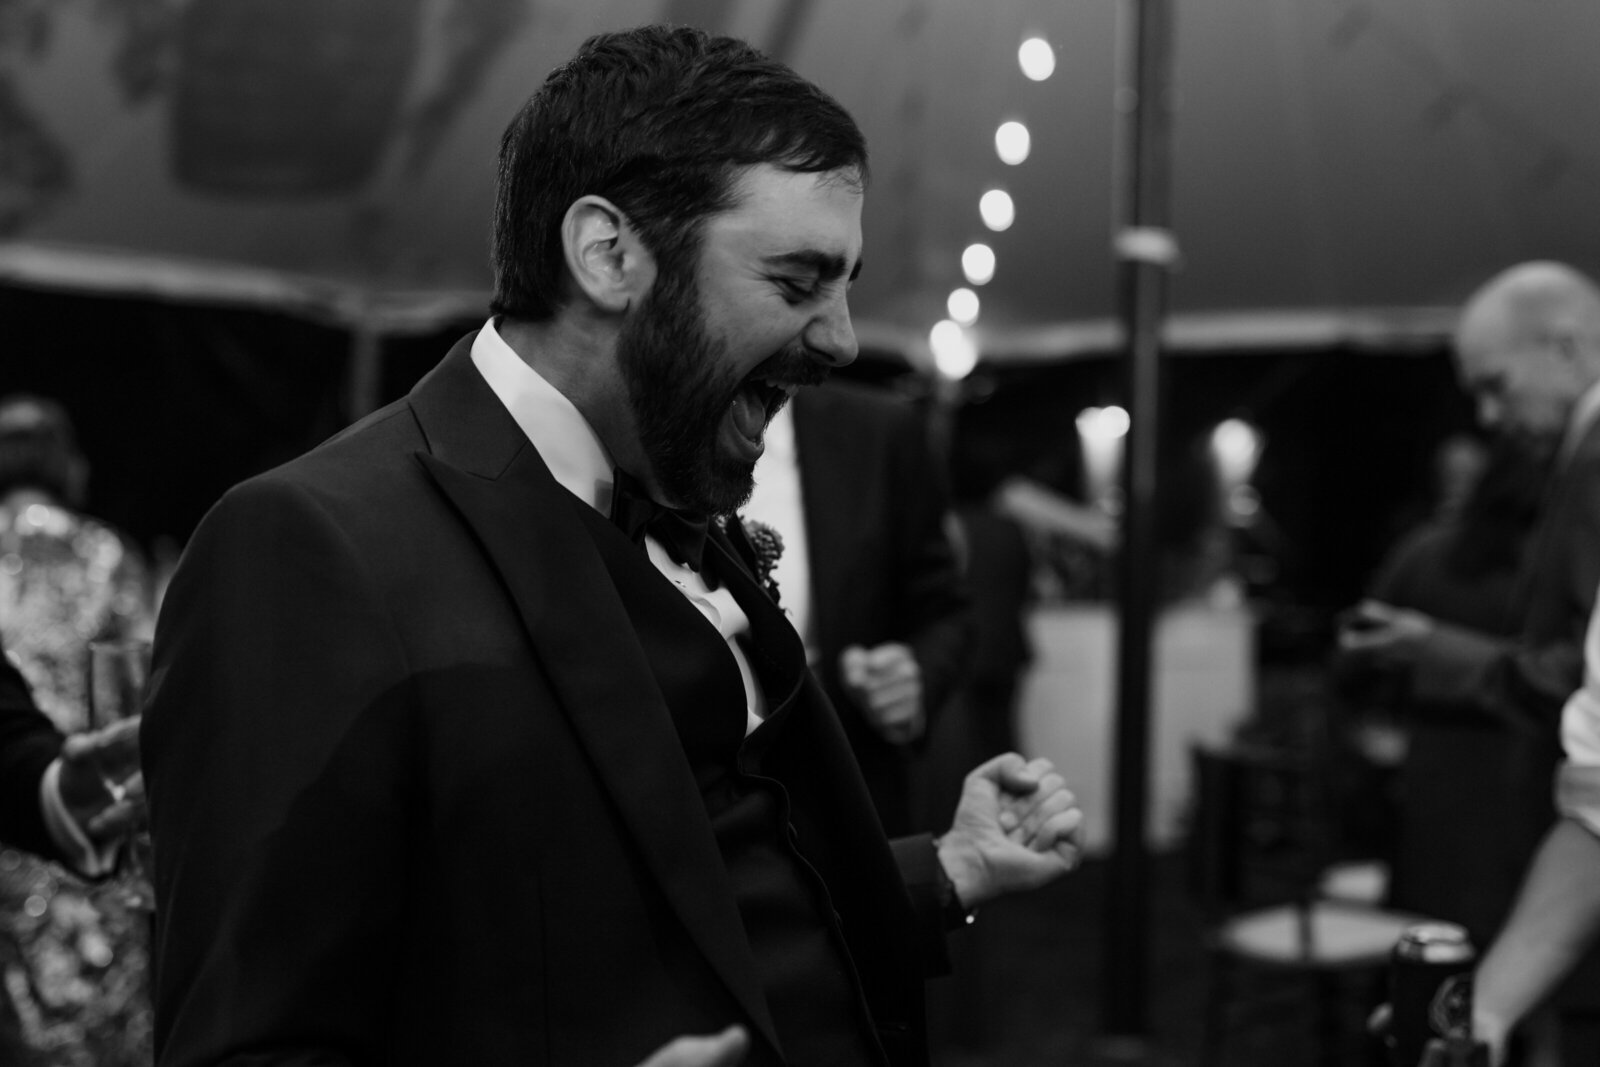 A groom dances and sings during a wedding reception